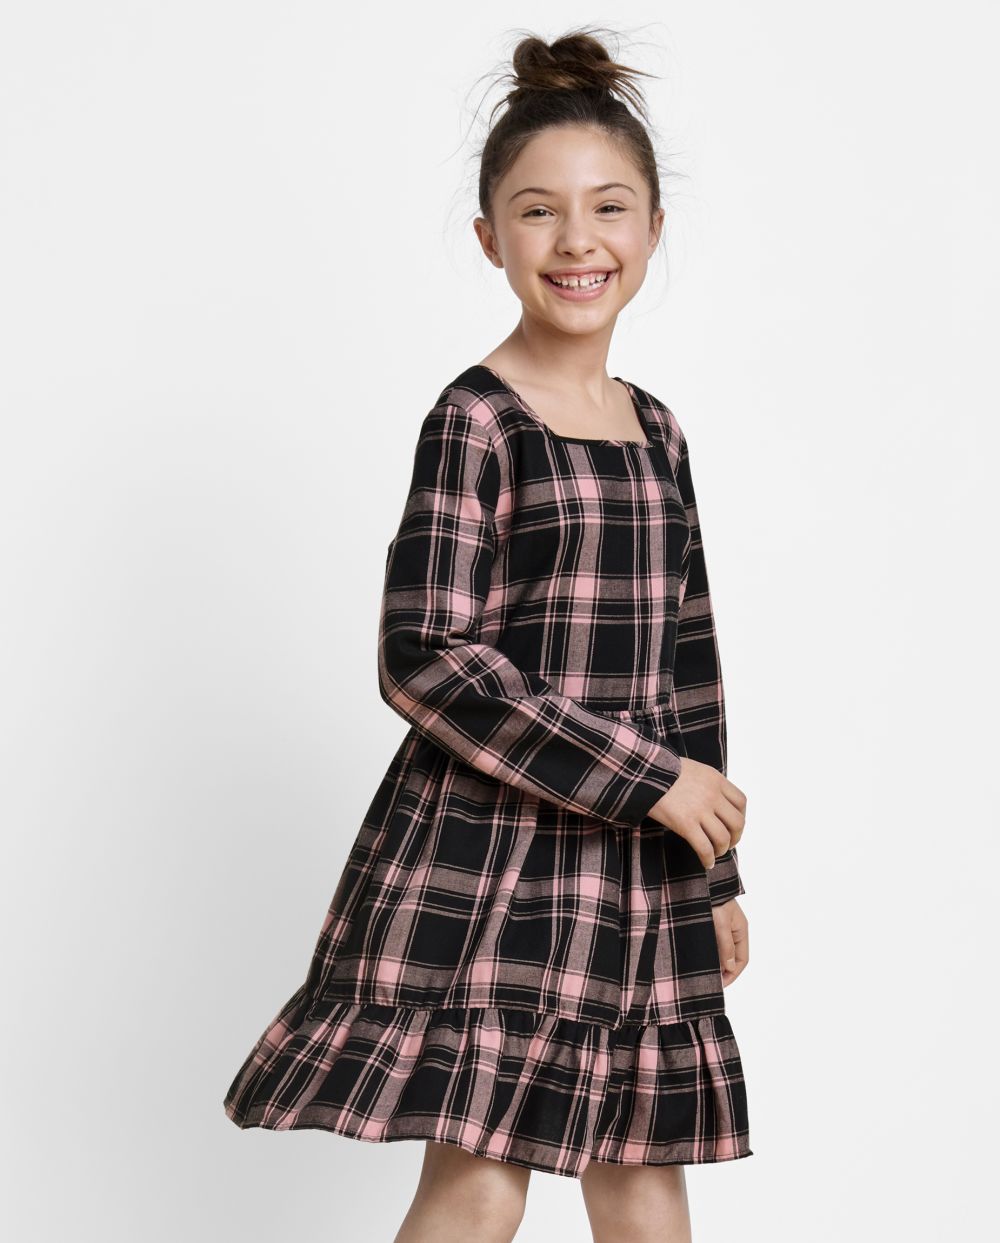 Girls Above the Knee Tiered Square Neck Plaid Print Long Sleeves Dress